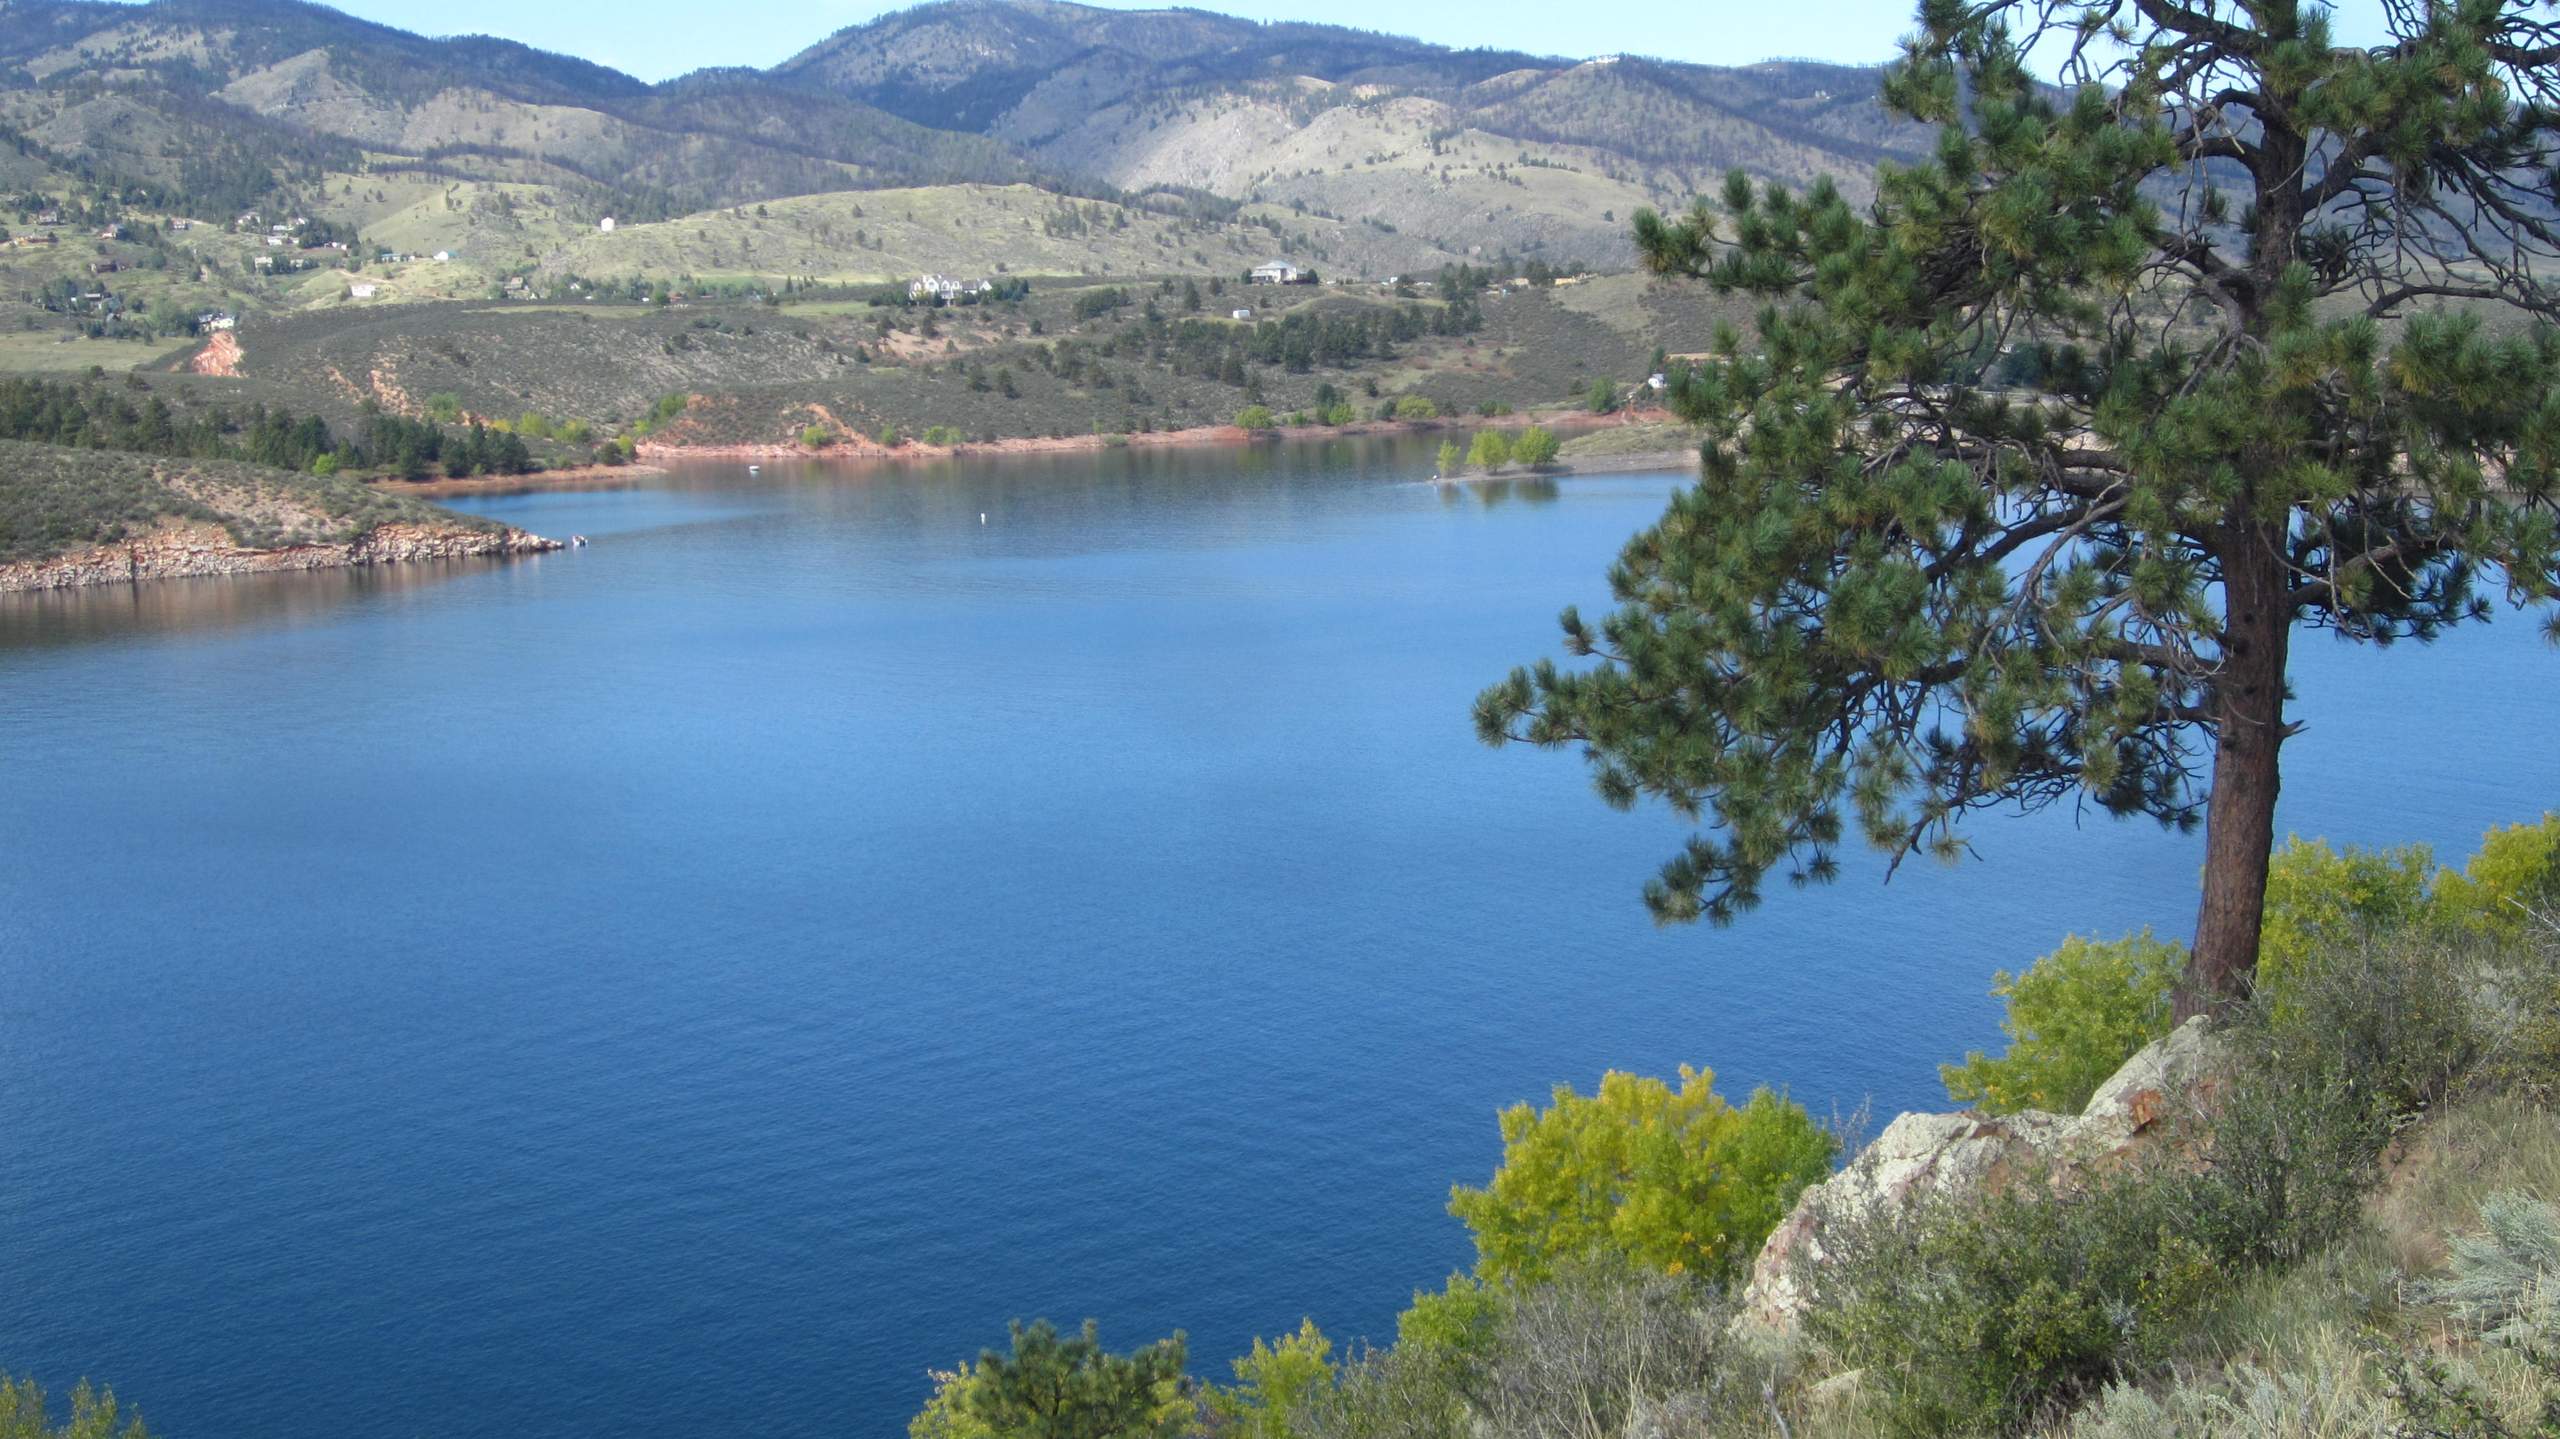 Fall colors are starting to show at the Horsetooth Reservoir.